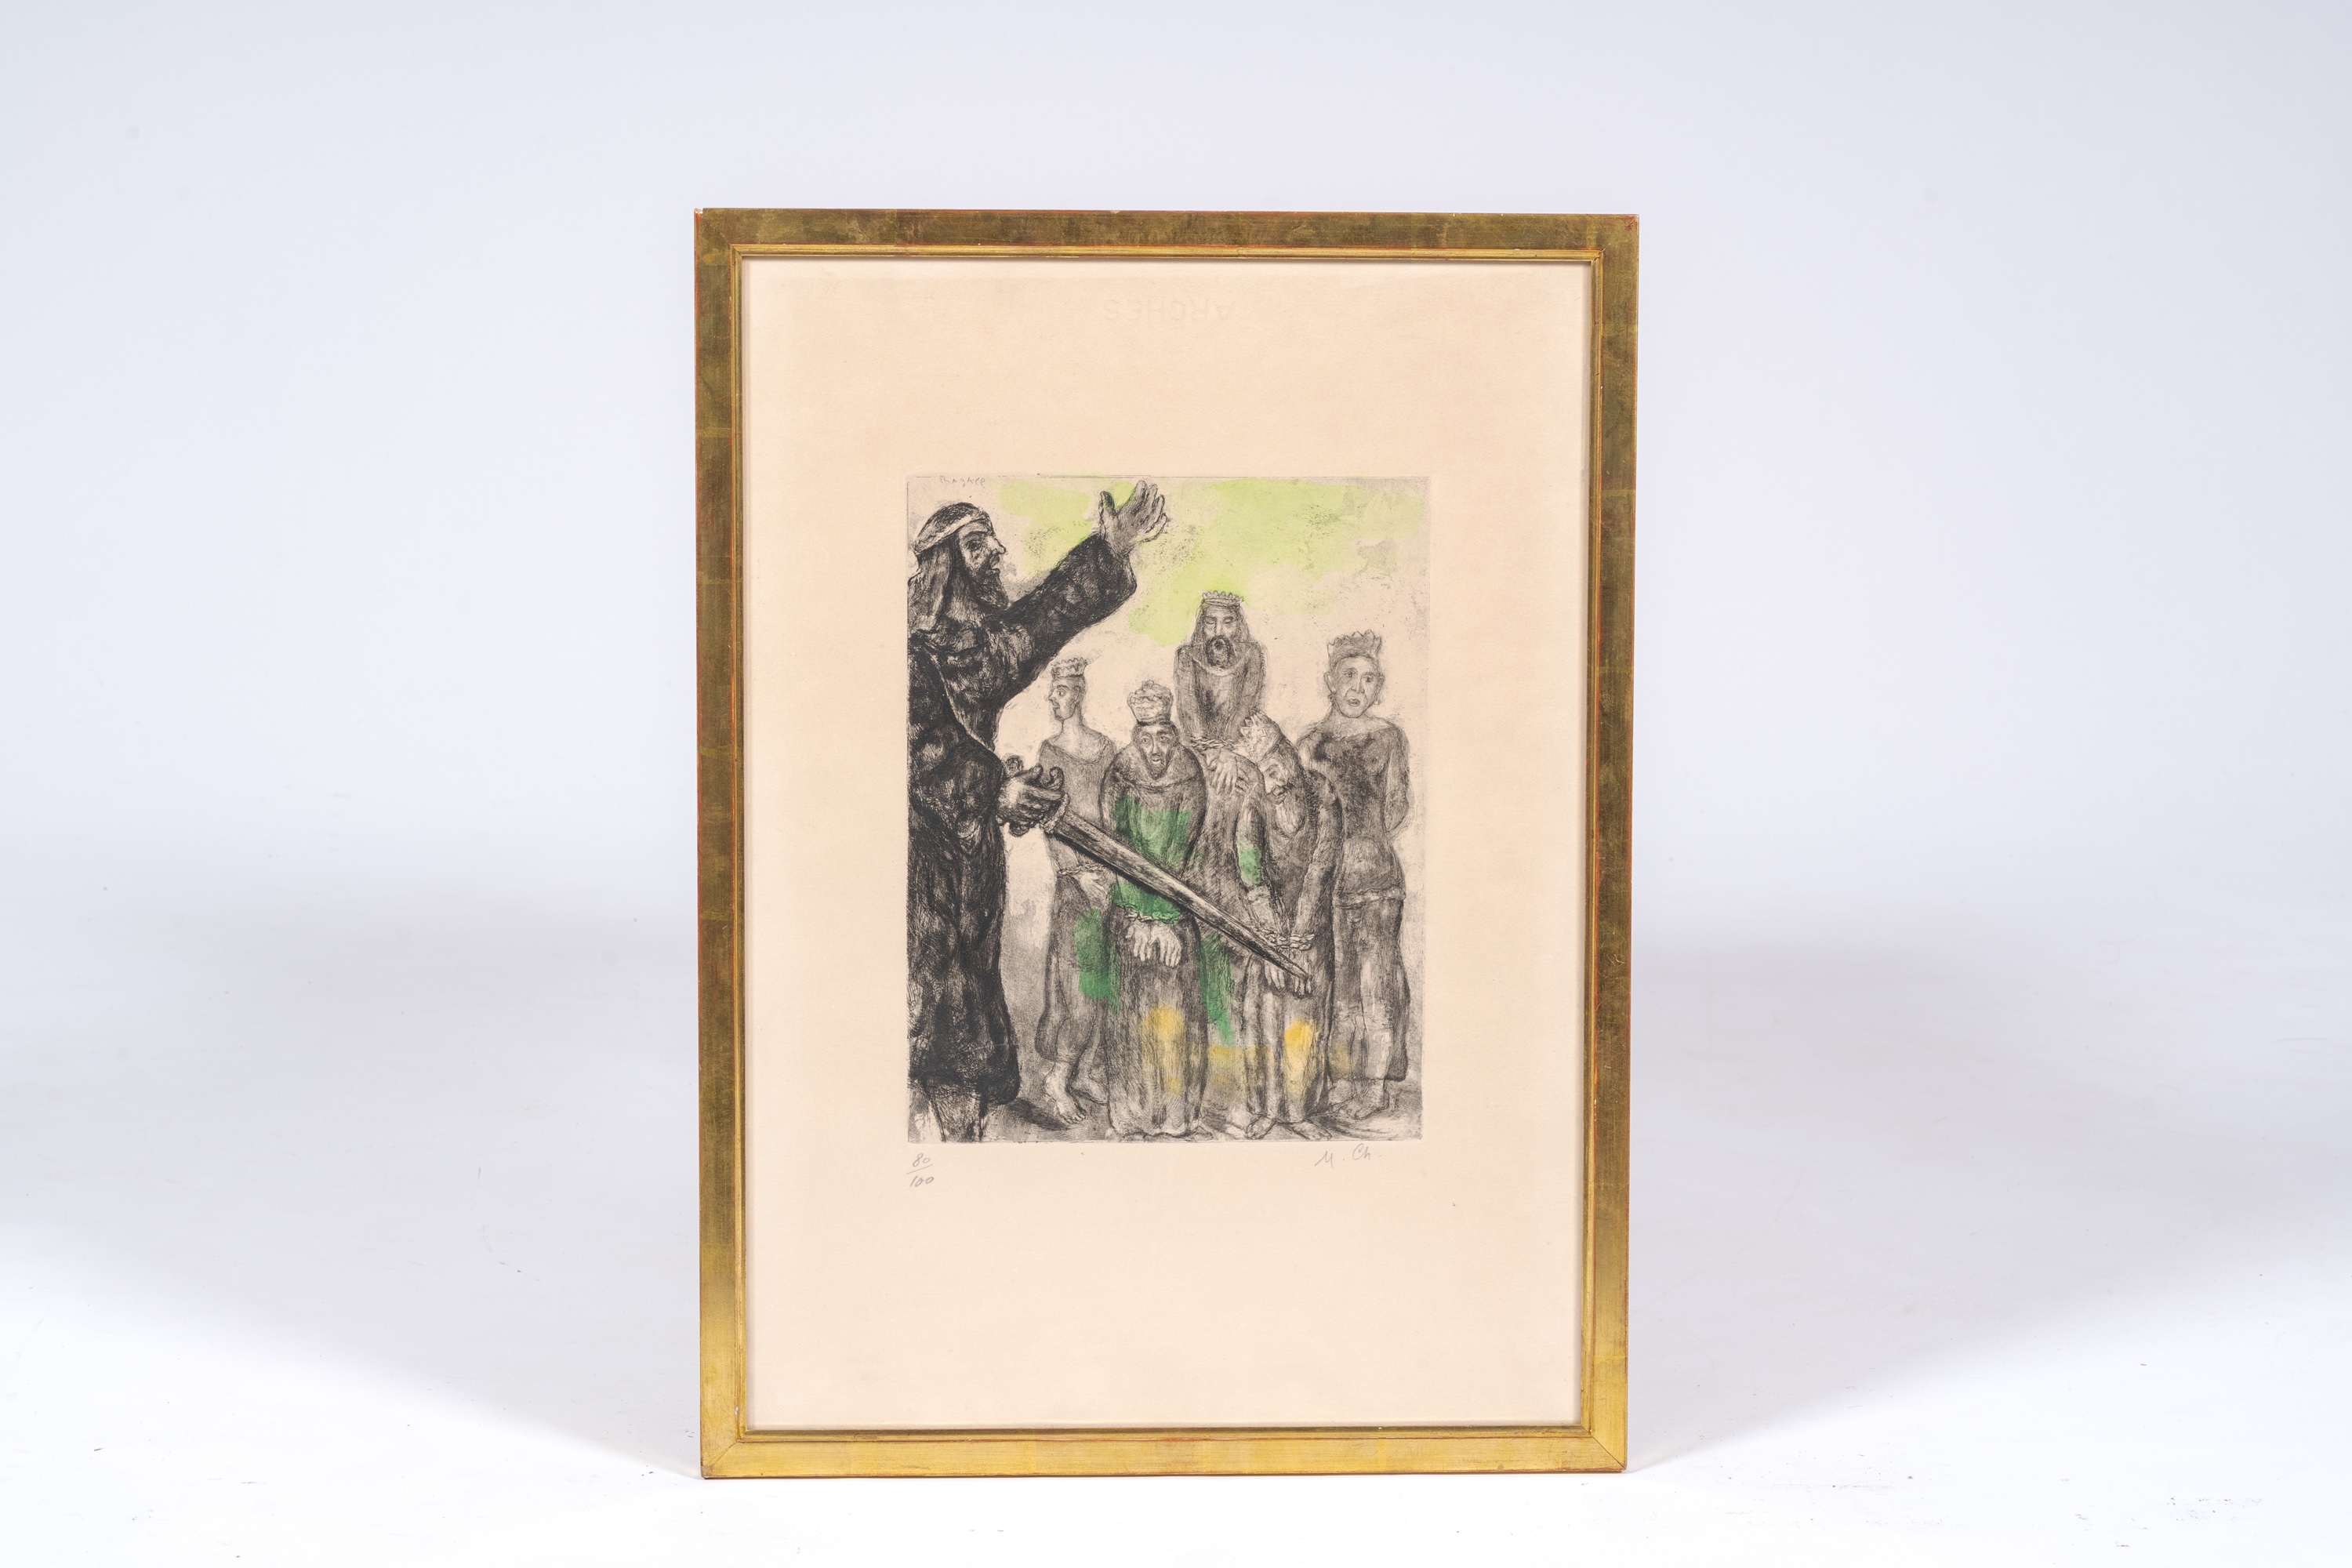 Marc Chagall (1887-1985): Joshua and the vanquished kings, hand-coloured etching, (1956) - Image 2 of 6